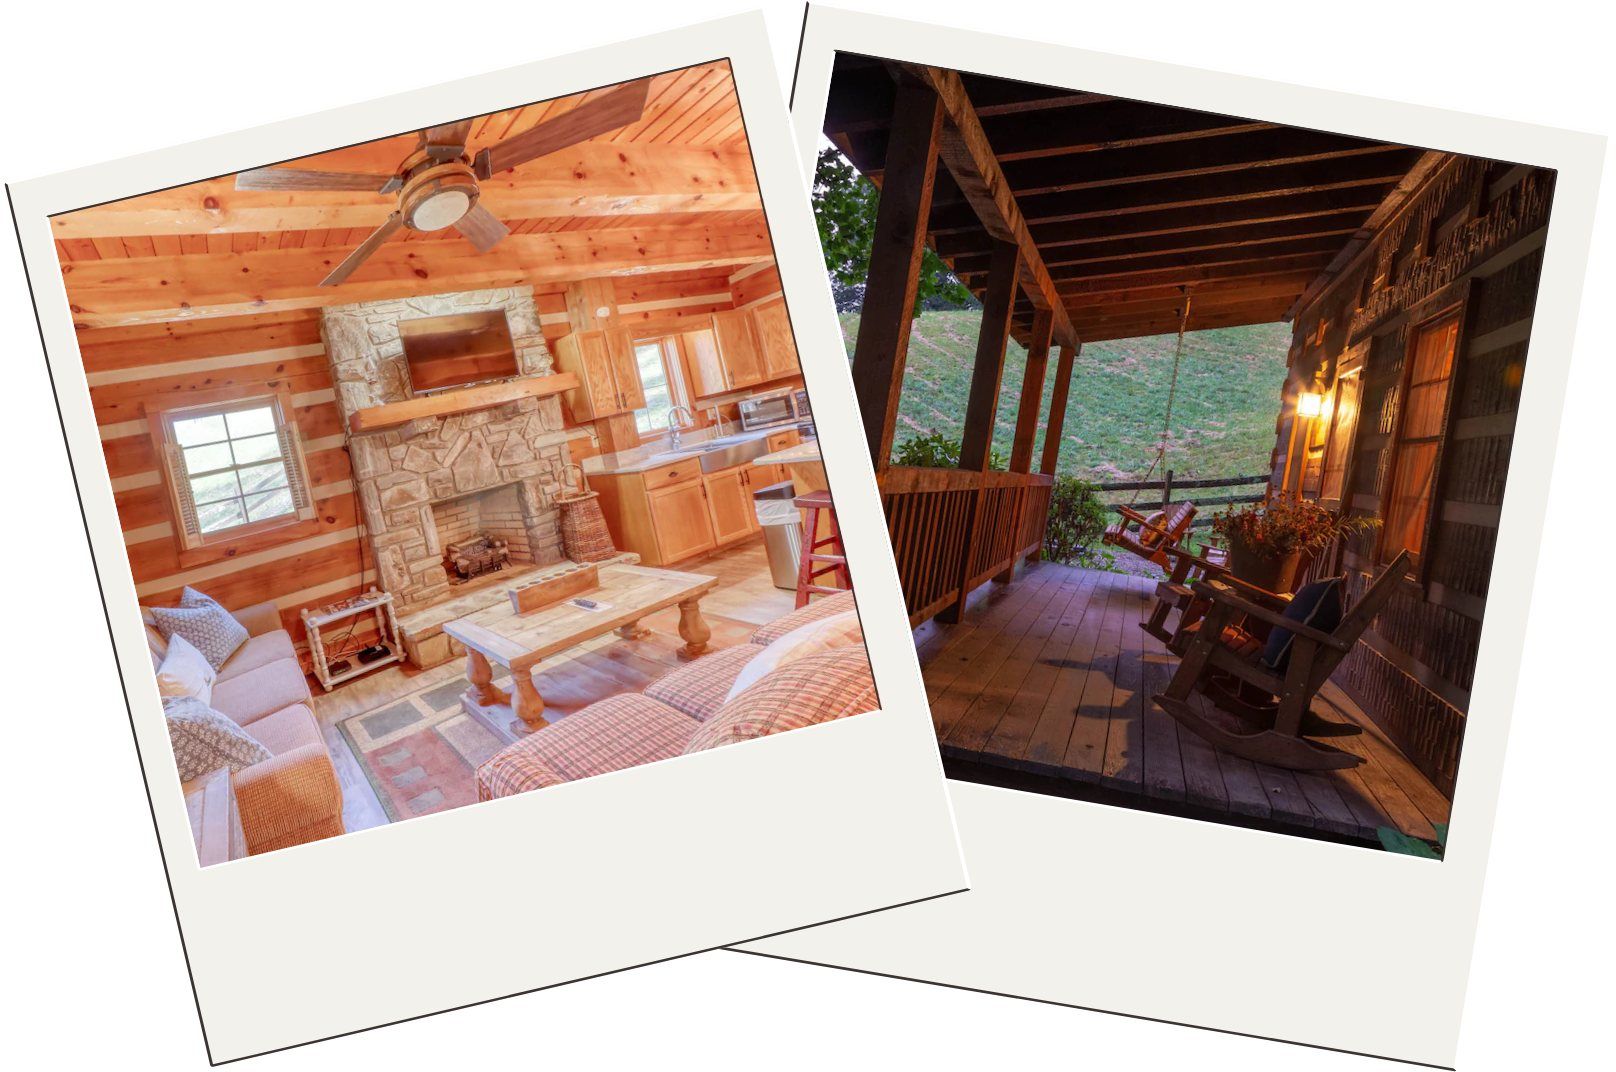 Airbnbs in the Great Smoky MountainsAirbnbs in the Great Smoky MountainsAirbnbs in the Great Smoky Mountains